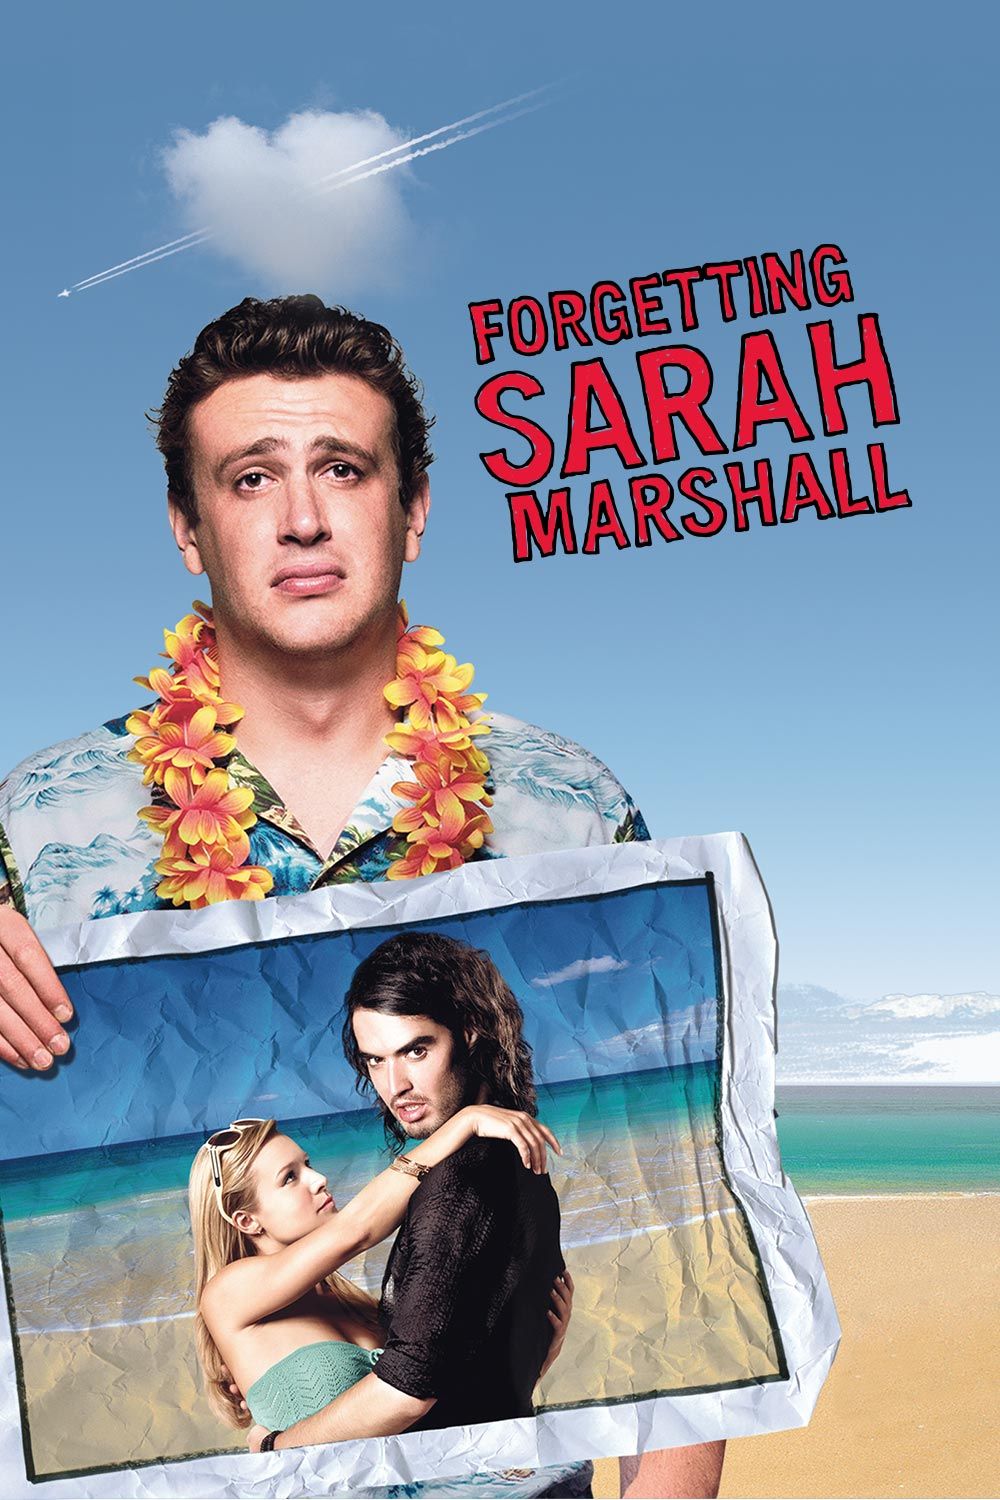 Watch Forgetting Sarah Marshall Online